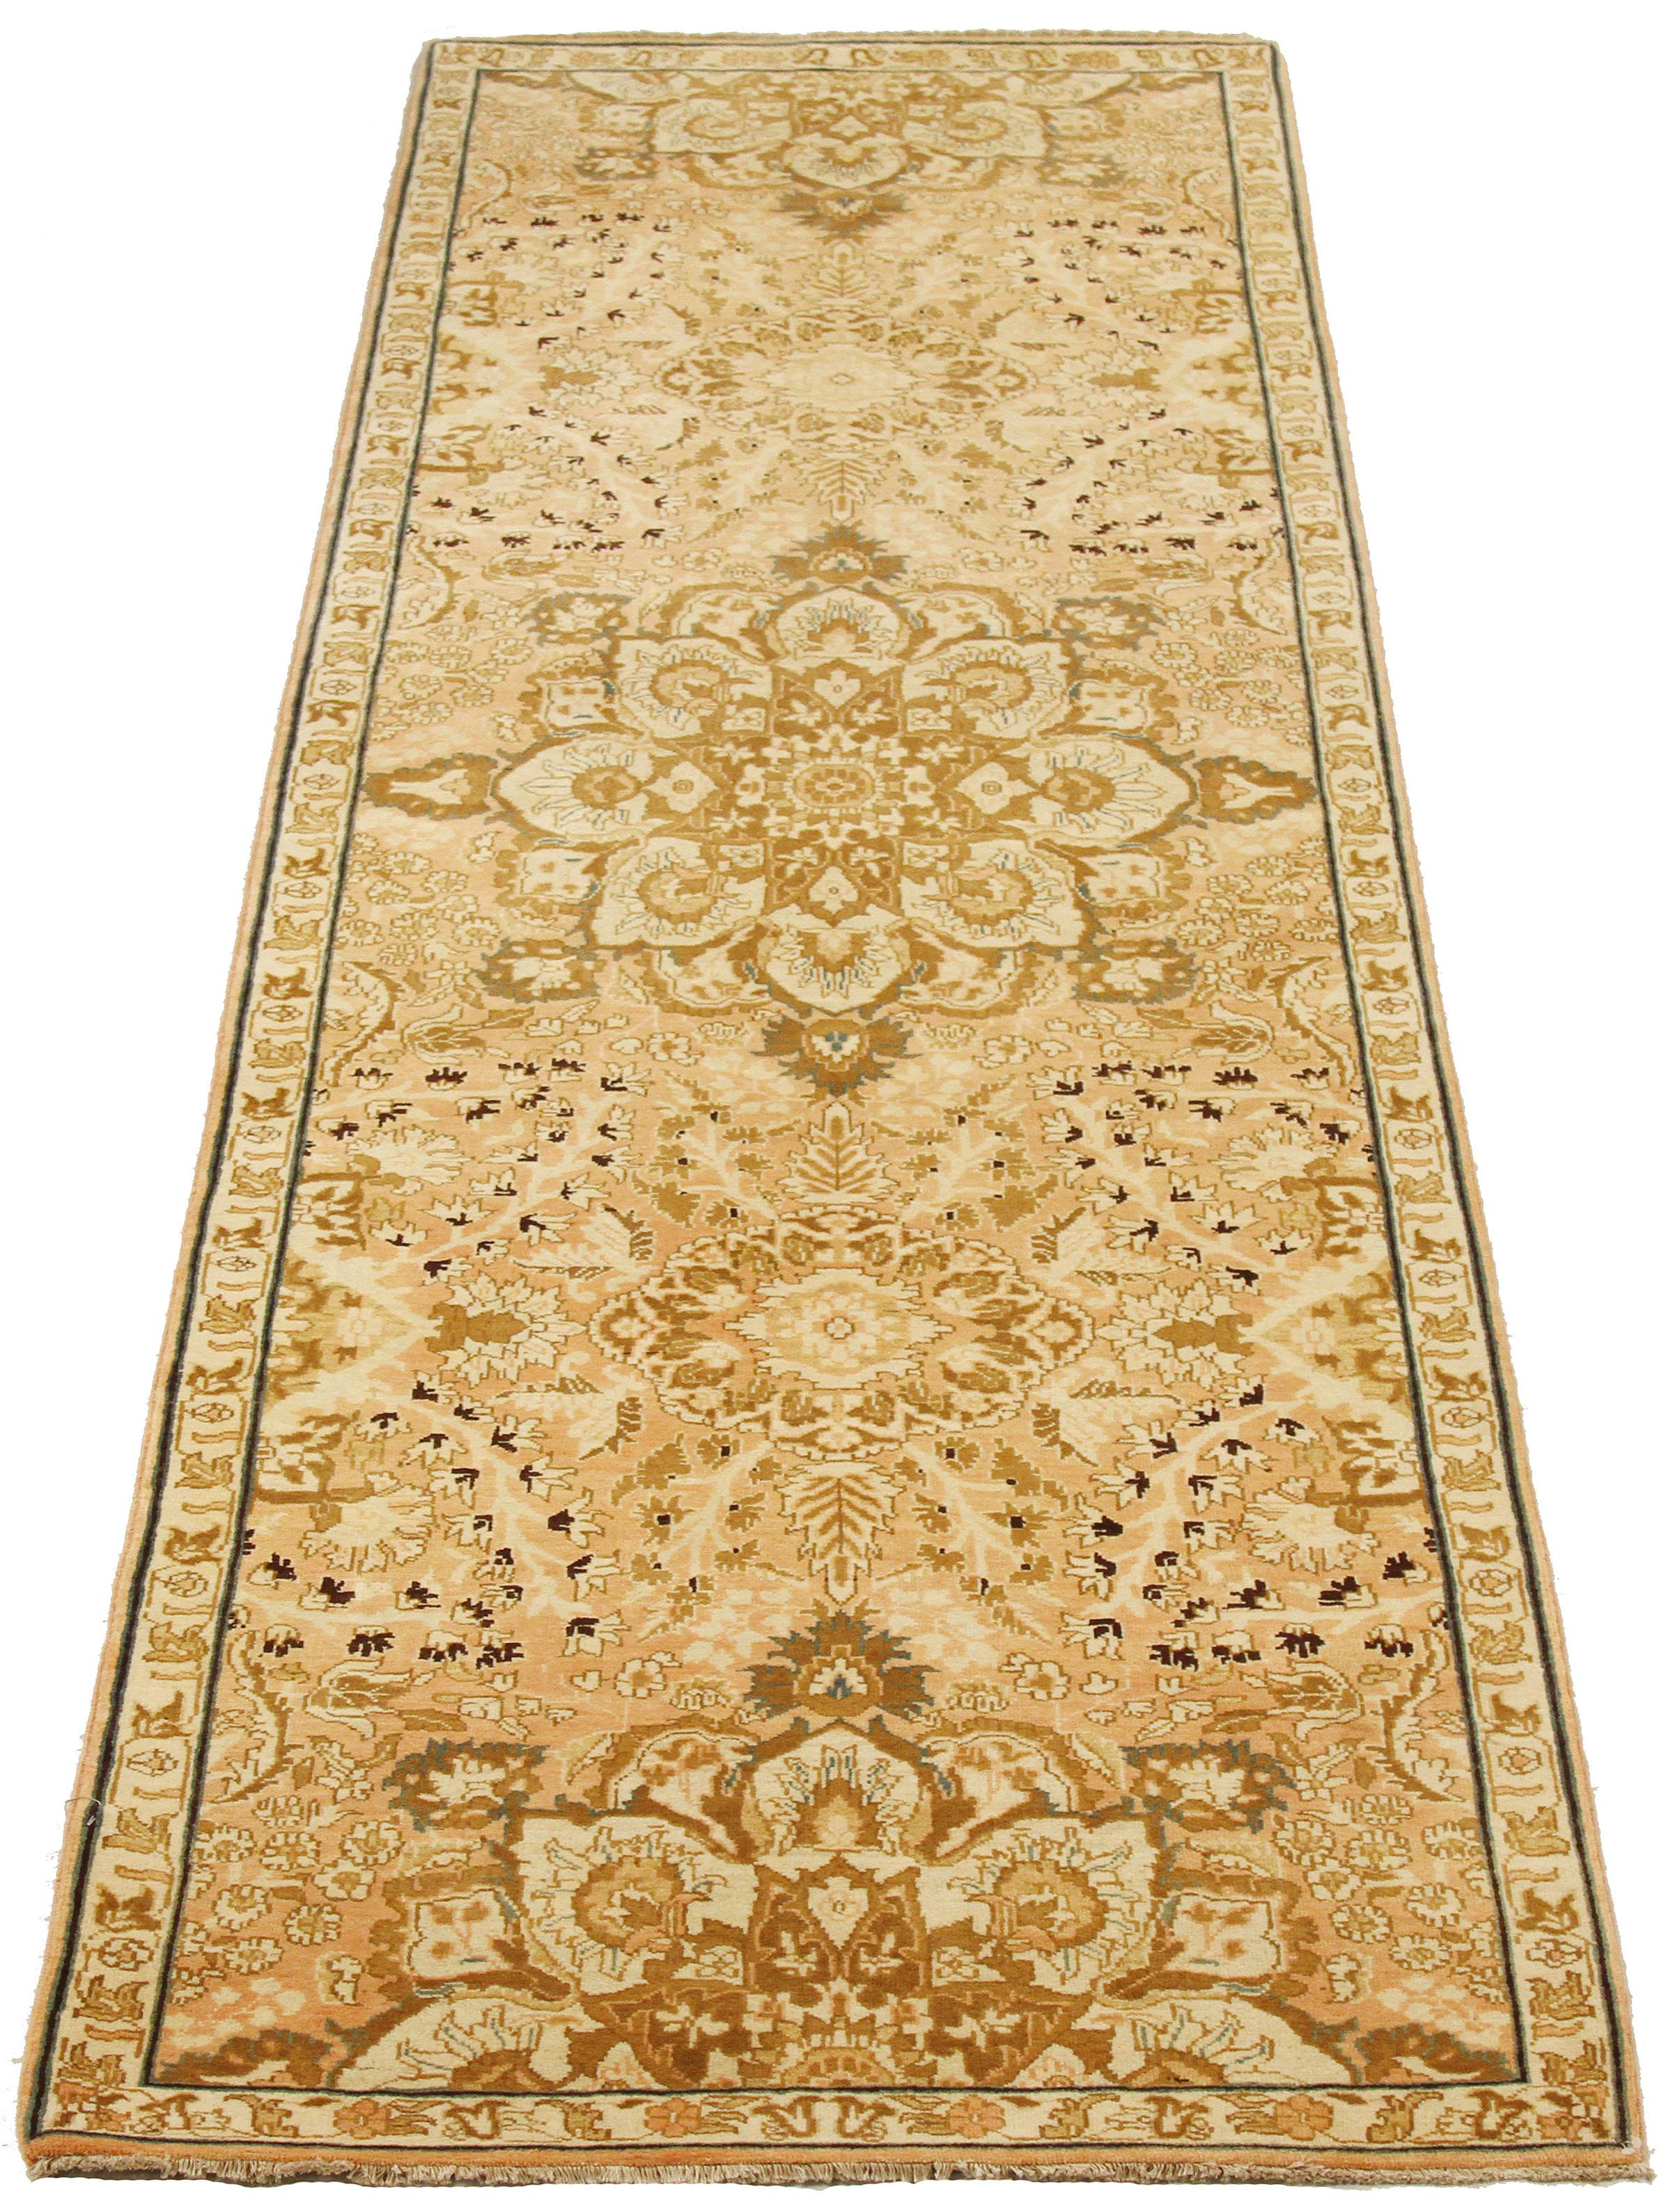 Contemporary Persian rug handwoven from the finest sheep’s wool and colored with all-natural vegetable dyes that are safe for humans and pets. It’s a traditional Tabriz weaving featuring a lovely ensemble of floral designs in brown and ivory over a